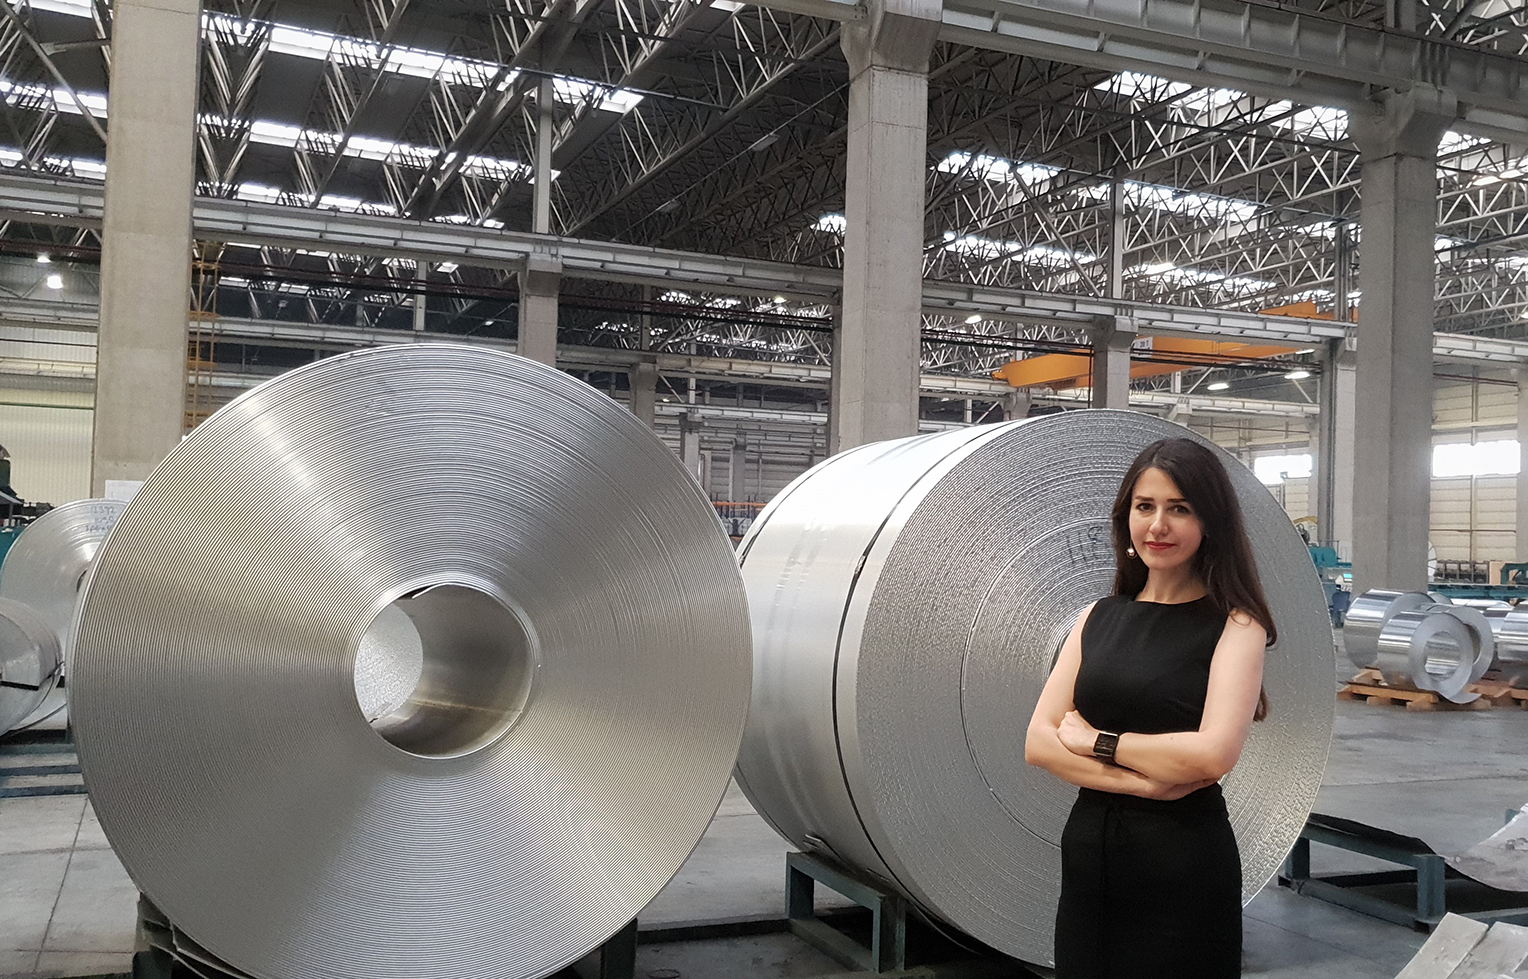 Article written by Almesan Aluminum Import and Risk Management Manager BENGÜ YILMAZ 